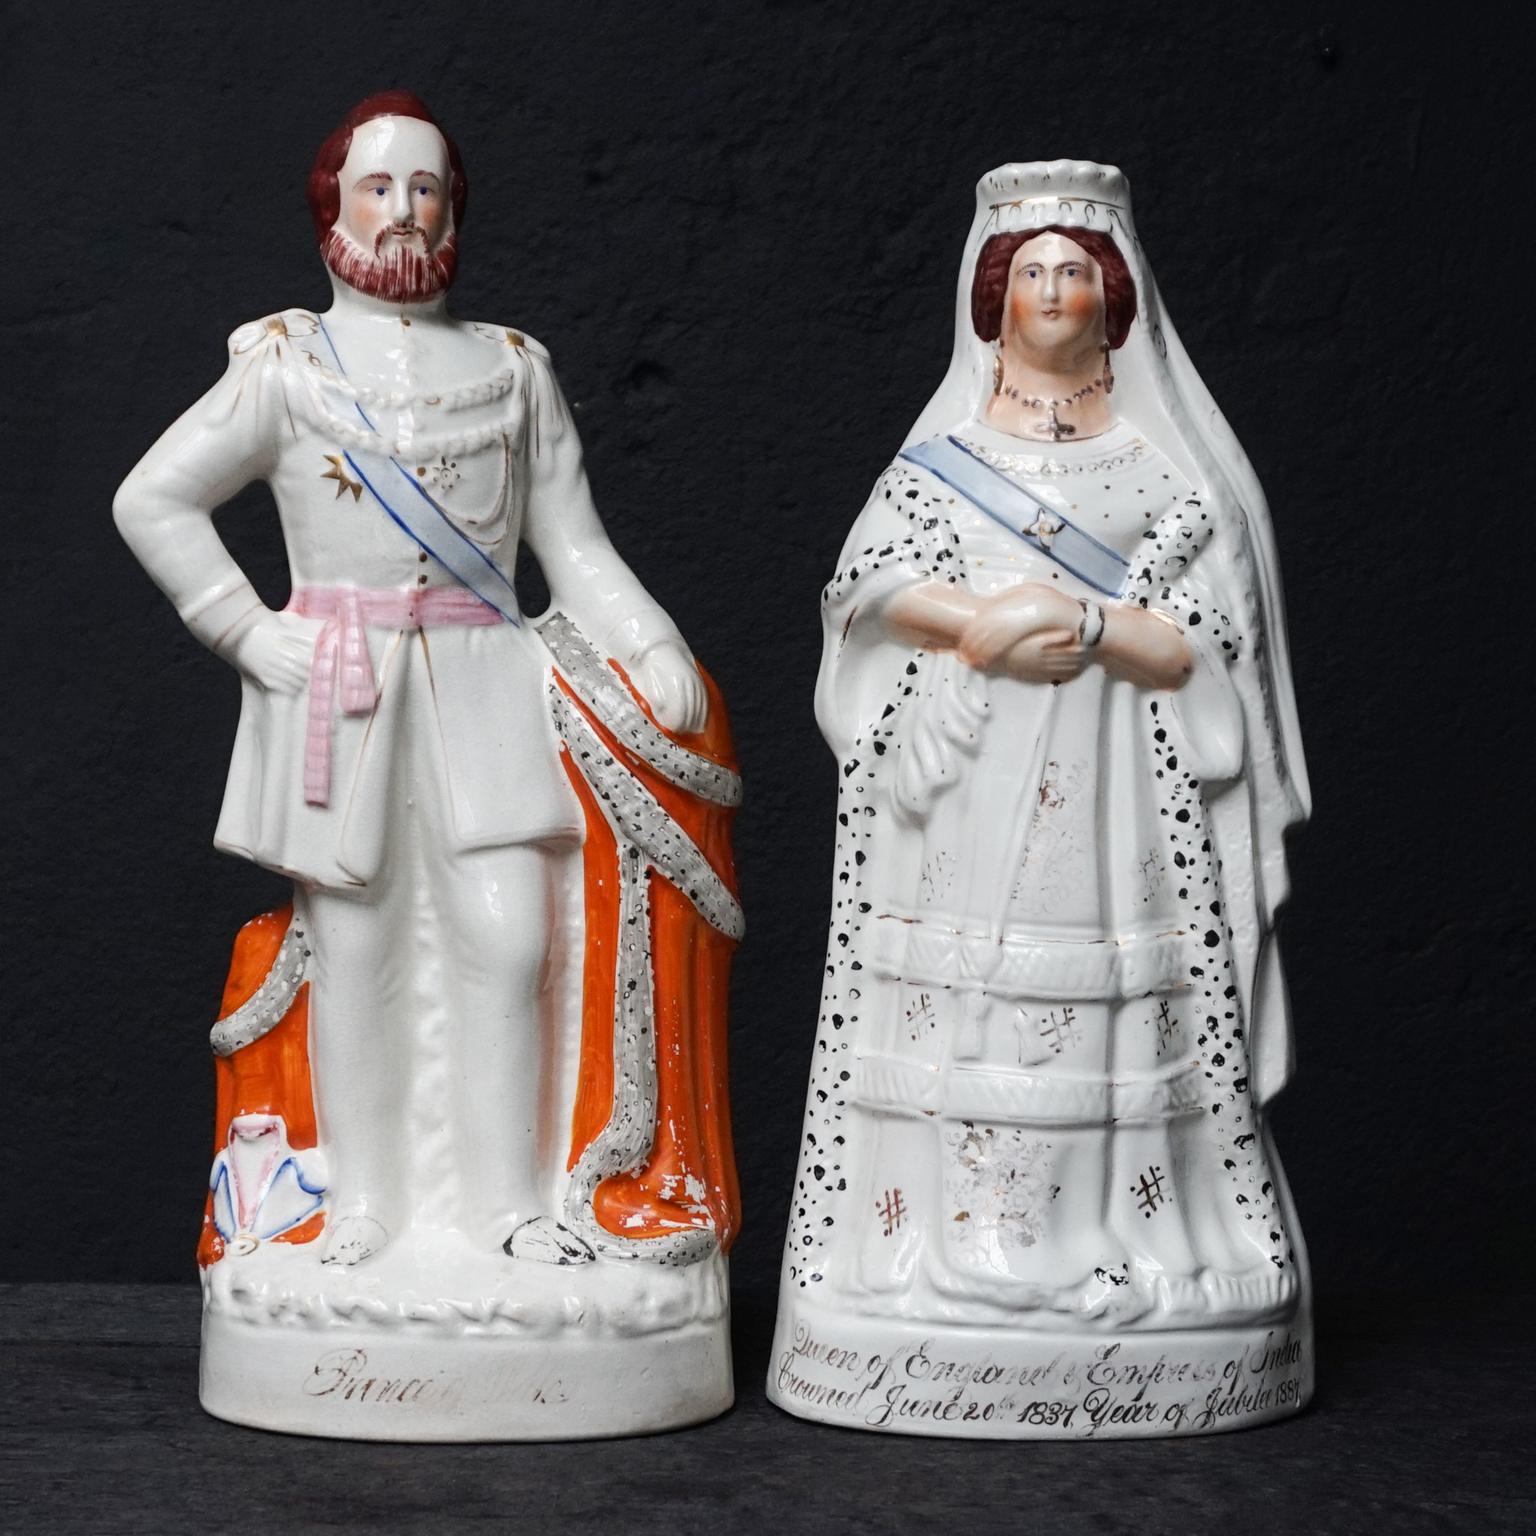 Set of 19th century ceramic Victorian Staffordshire figurines of Queen Victoria and Prince Albert.
Each with gilded trim and polychrome enamels.

Antique Queen Victoria of England ceramic Victorian figurine. 
The gold gilt script on Victoria's base